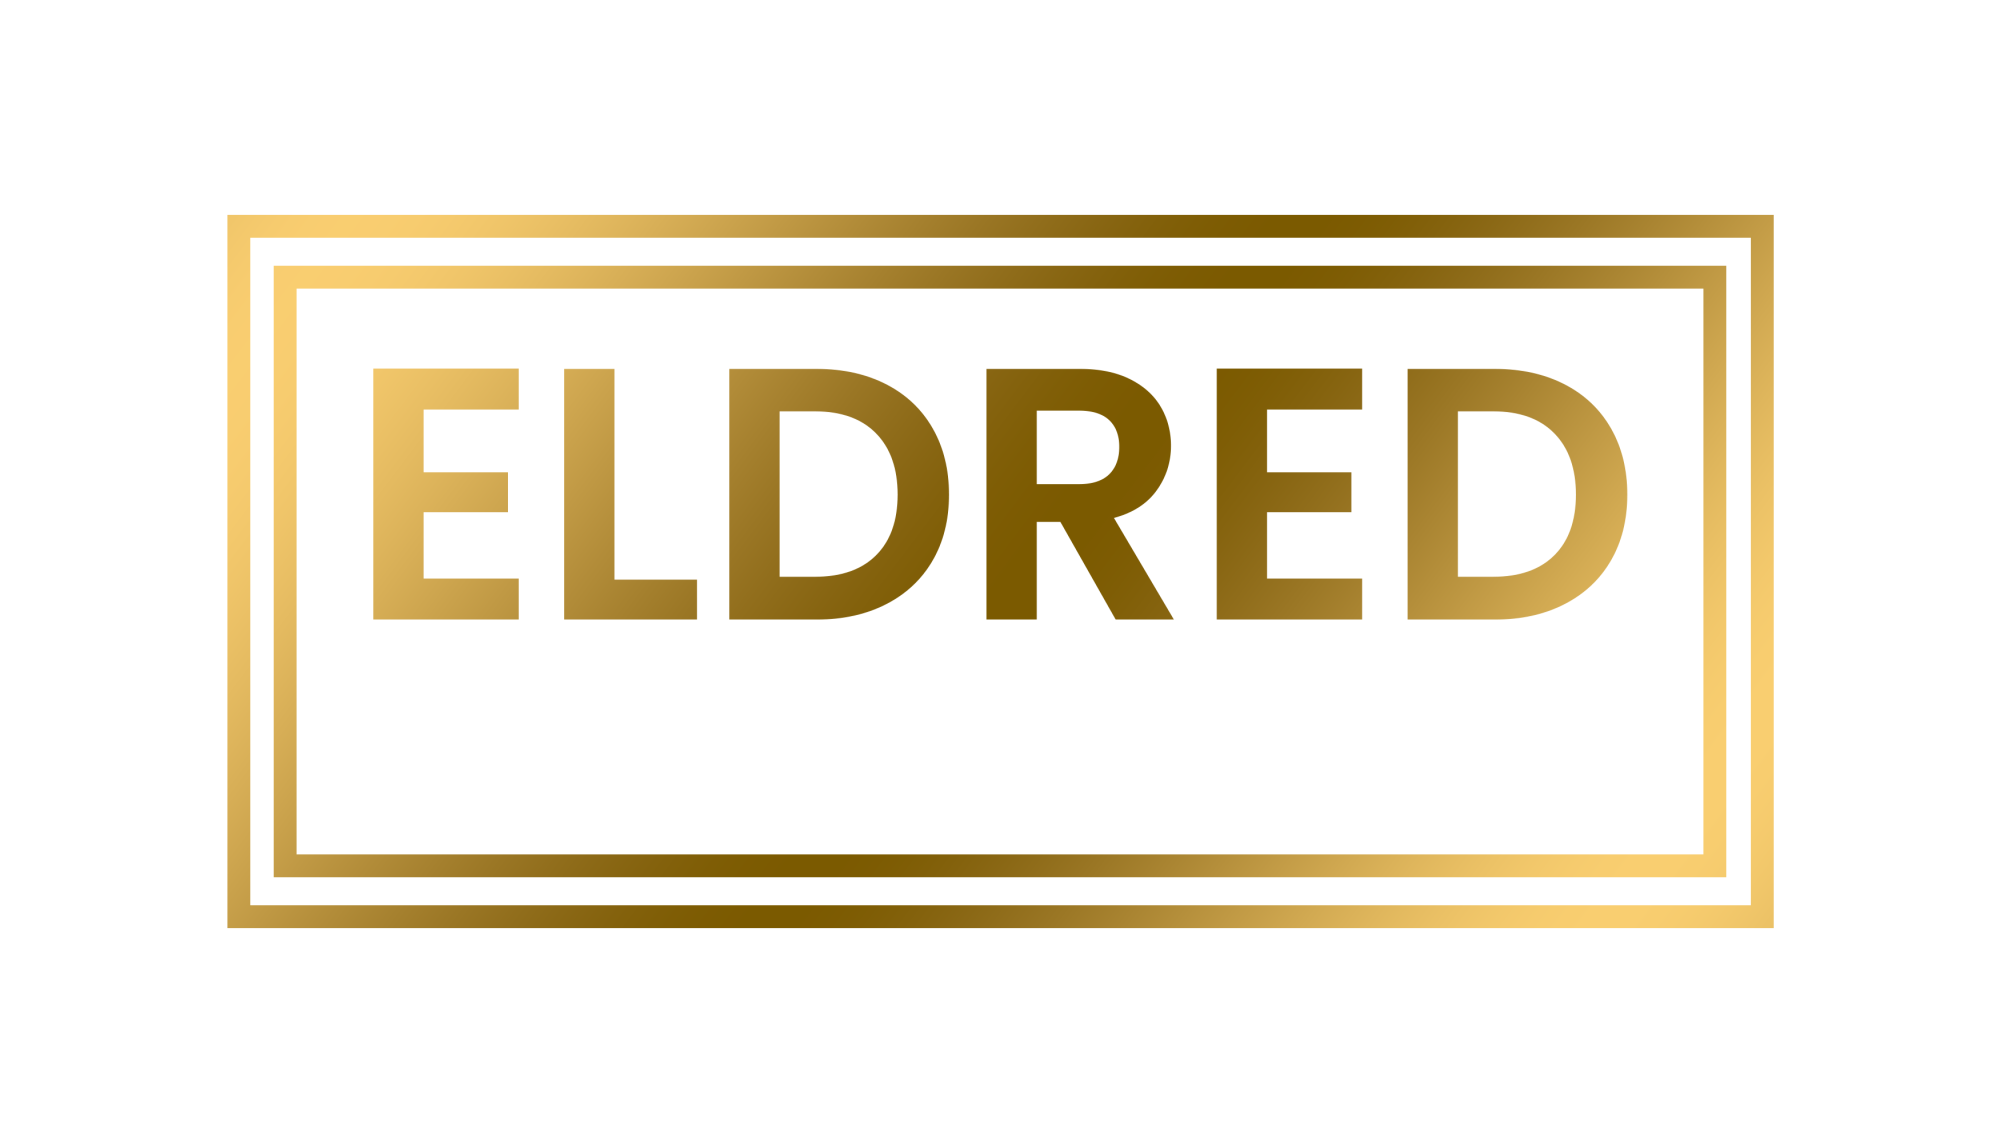 Eldred electrical services logo in gold